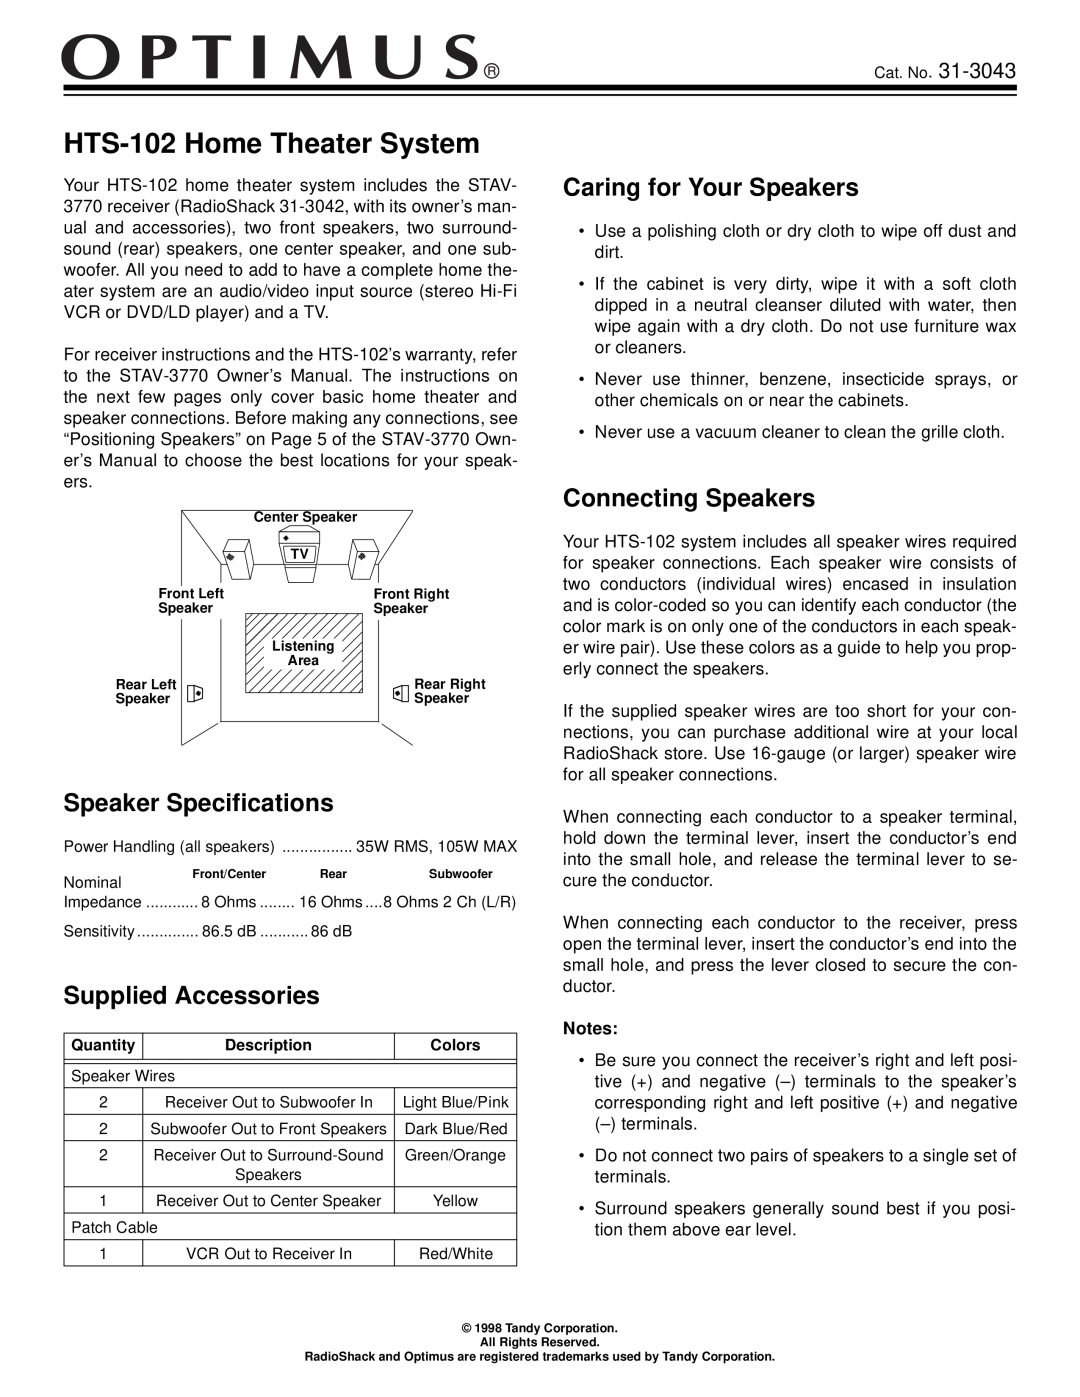 Optimus HTS-102 specifications Caring for Your Speakers, Connecting Speakers, Speaker Specifications, Supplied Accessories 